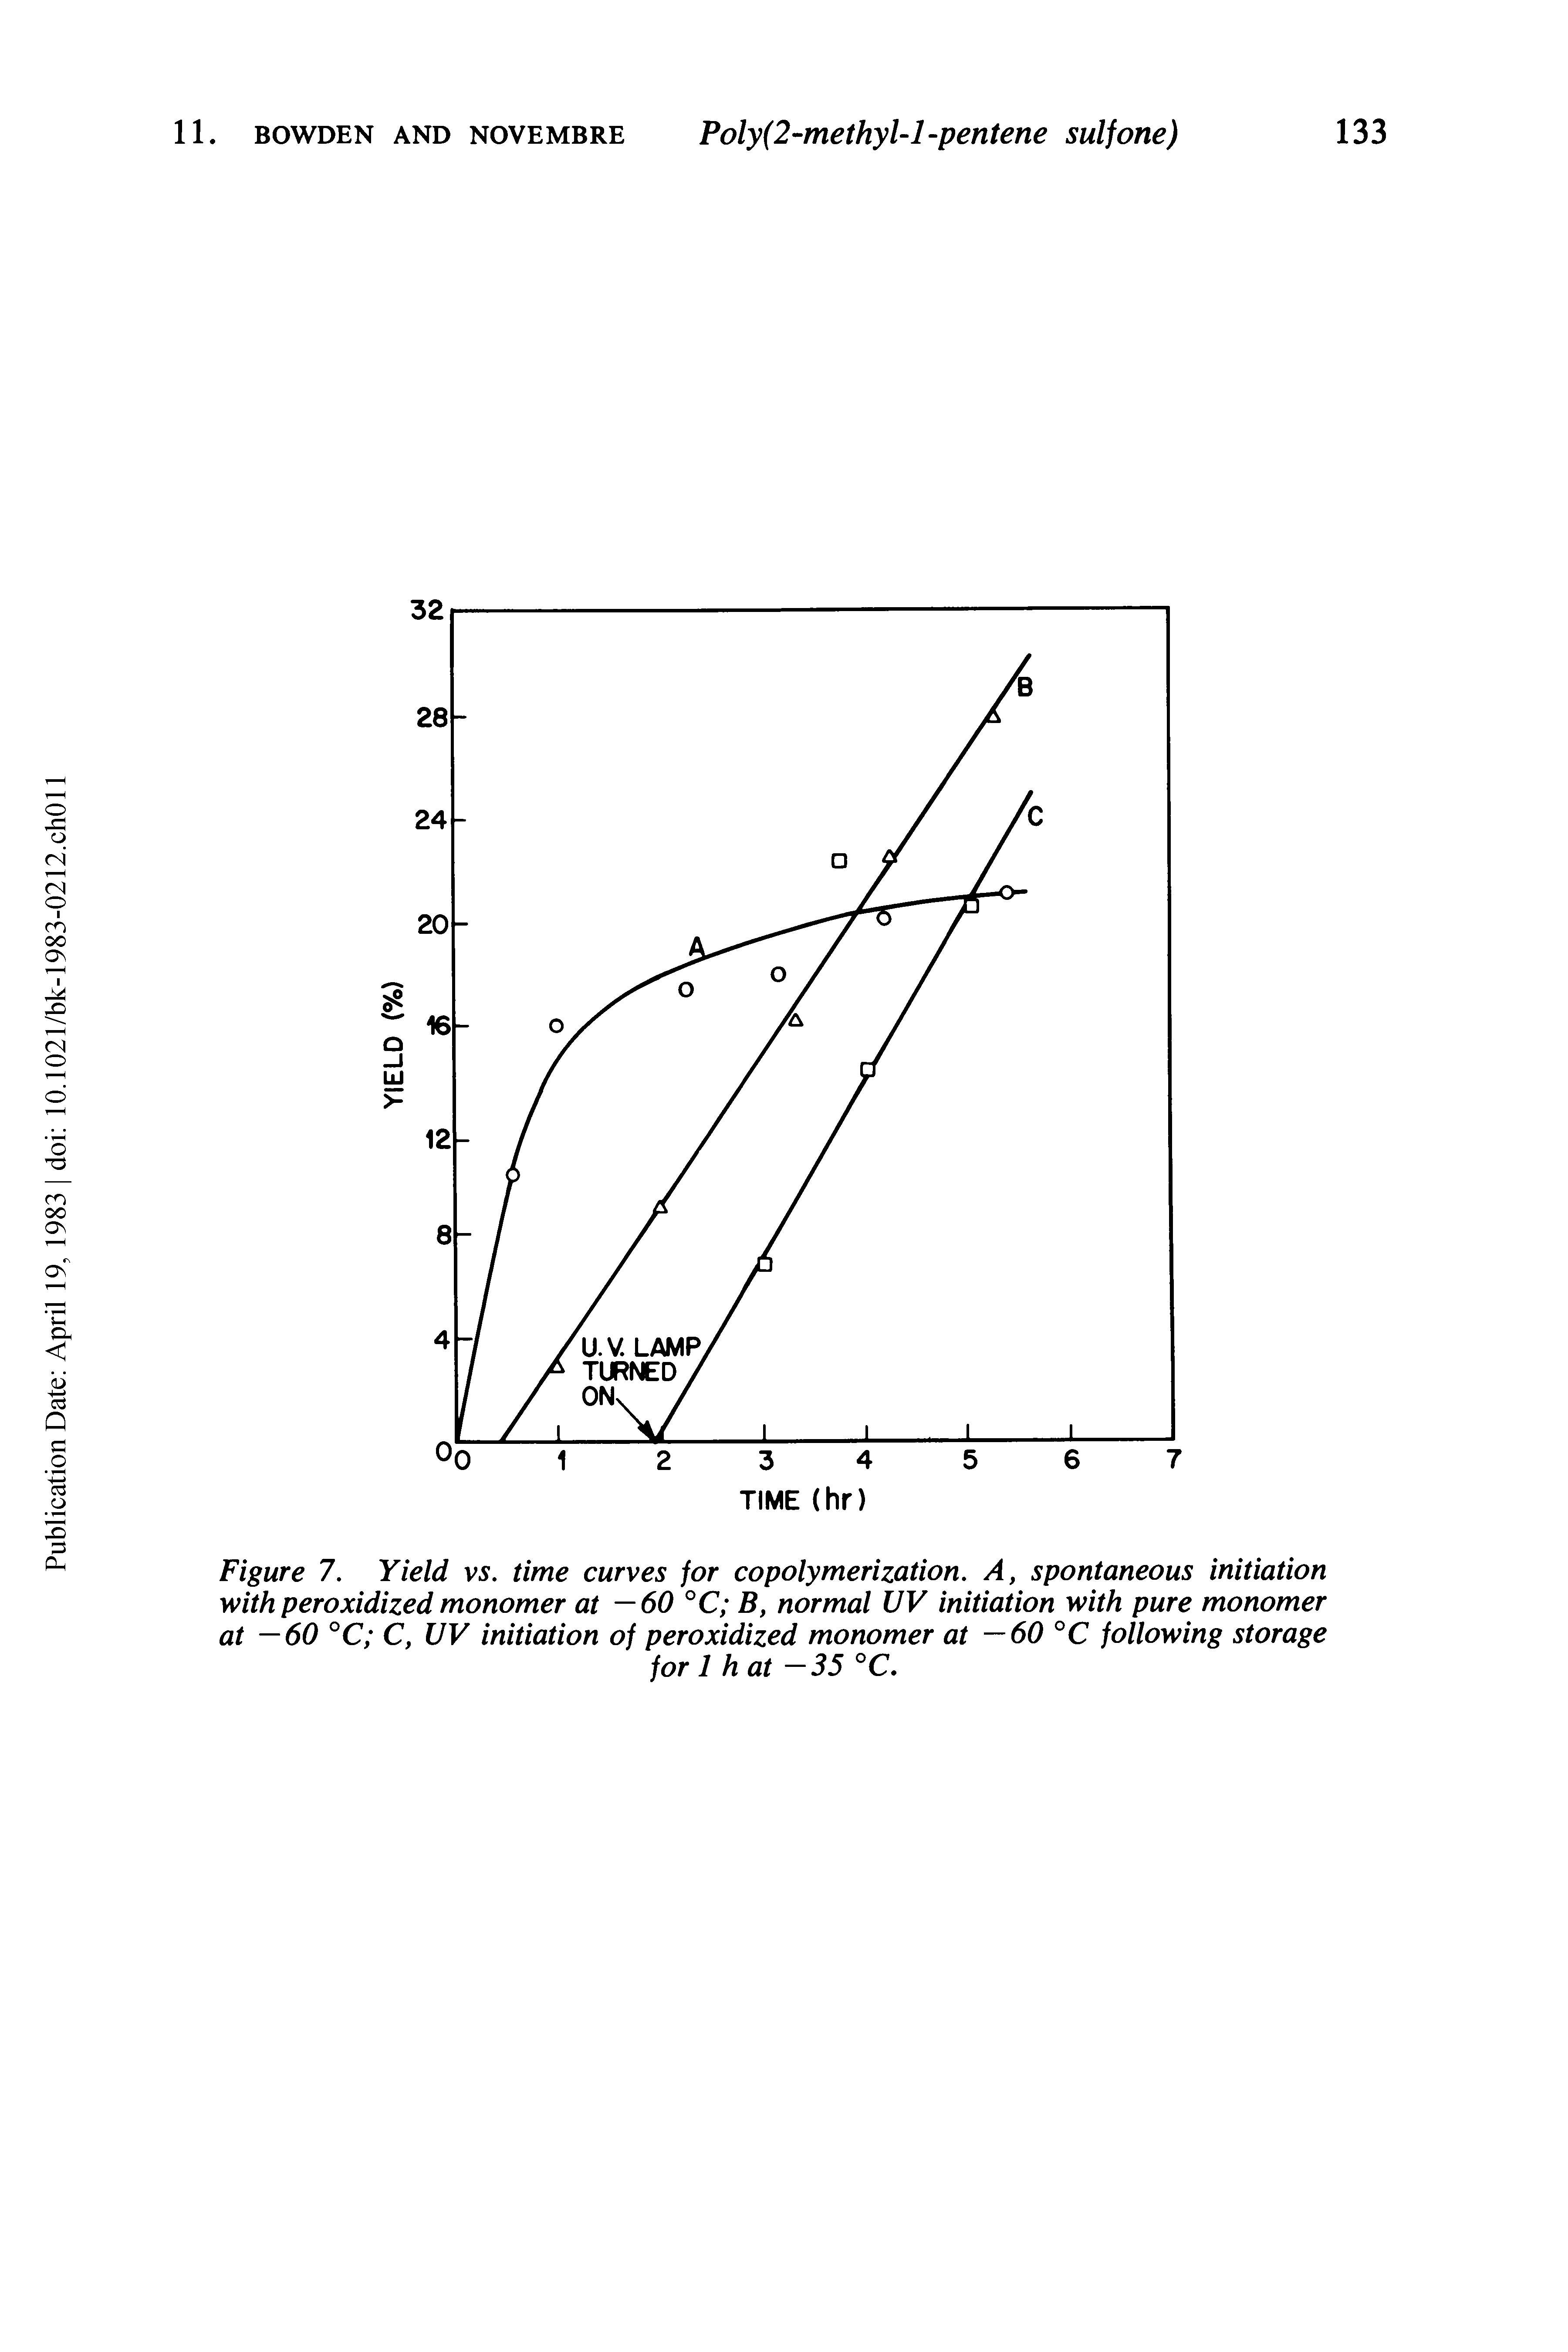 Figure 7. Yield vs. time curves for copolymerization. A, spontaneous initiation with peroxidized monomer at —60 °C B, normal UV initiation with pure monomer at —60 °C C, UV initiation of peroxidized monomer at —60 °C following storage...